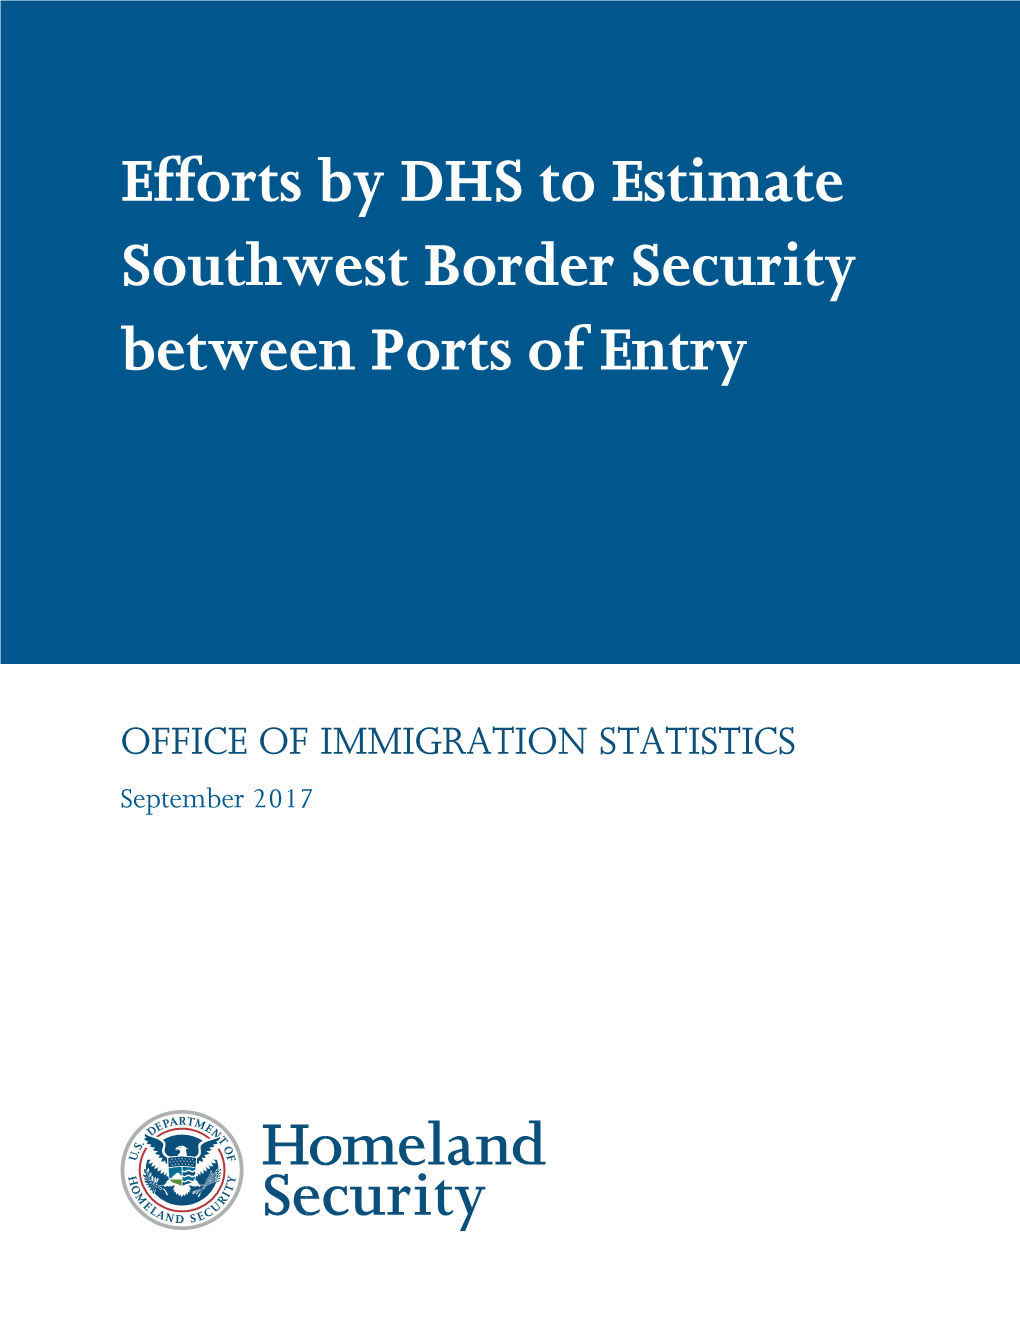 Efforts by DHS to Estimate Southwest Border Security Between Ports of Entry